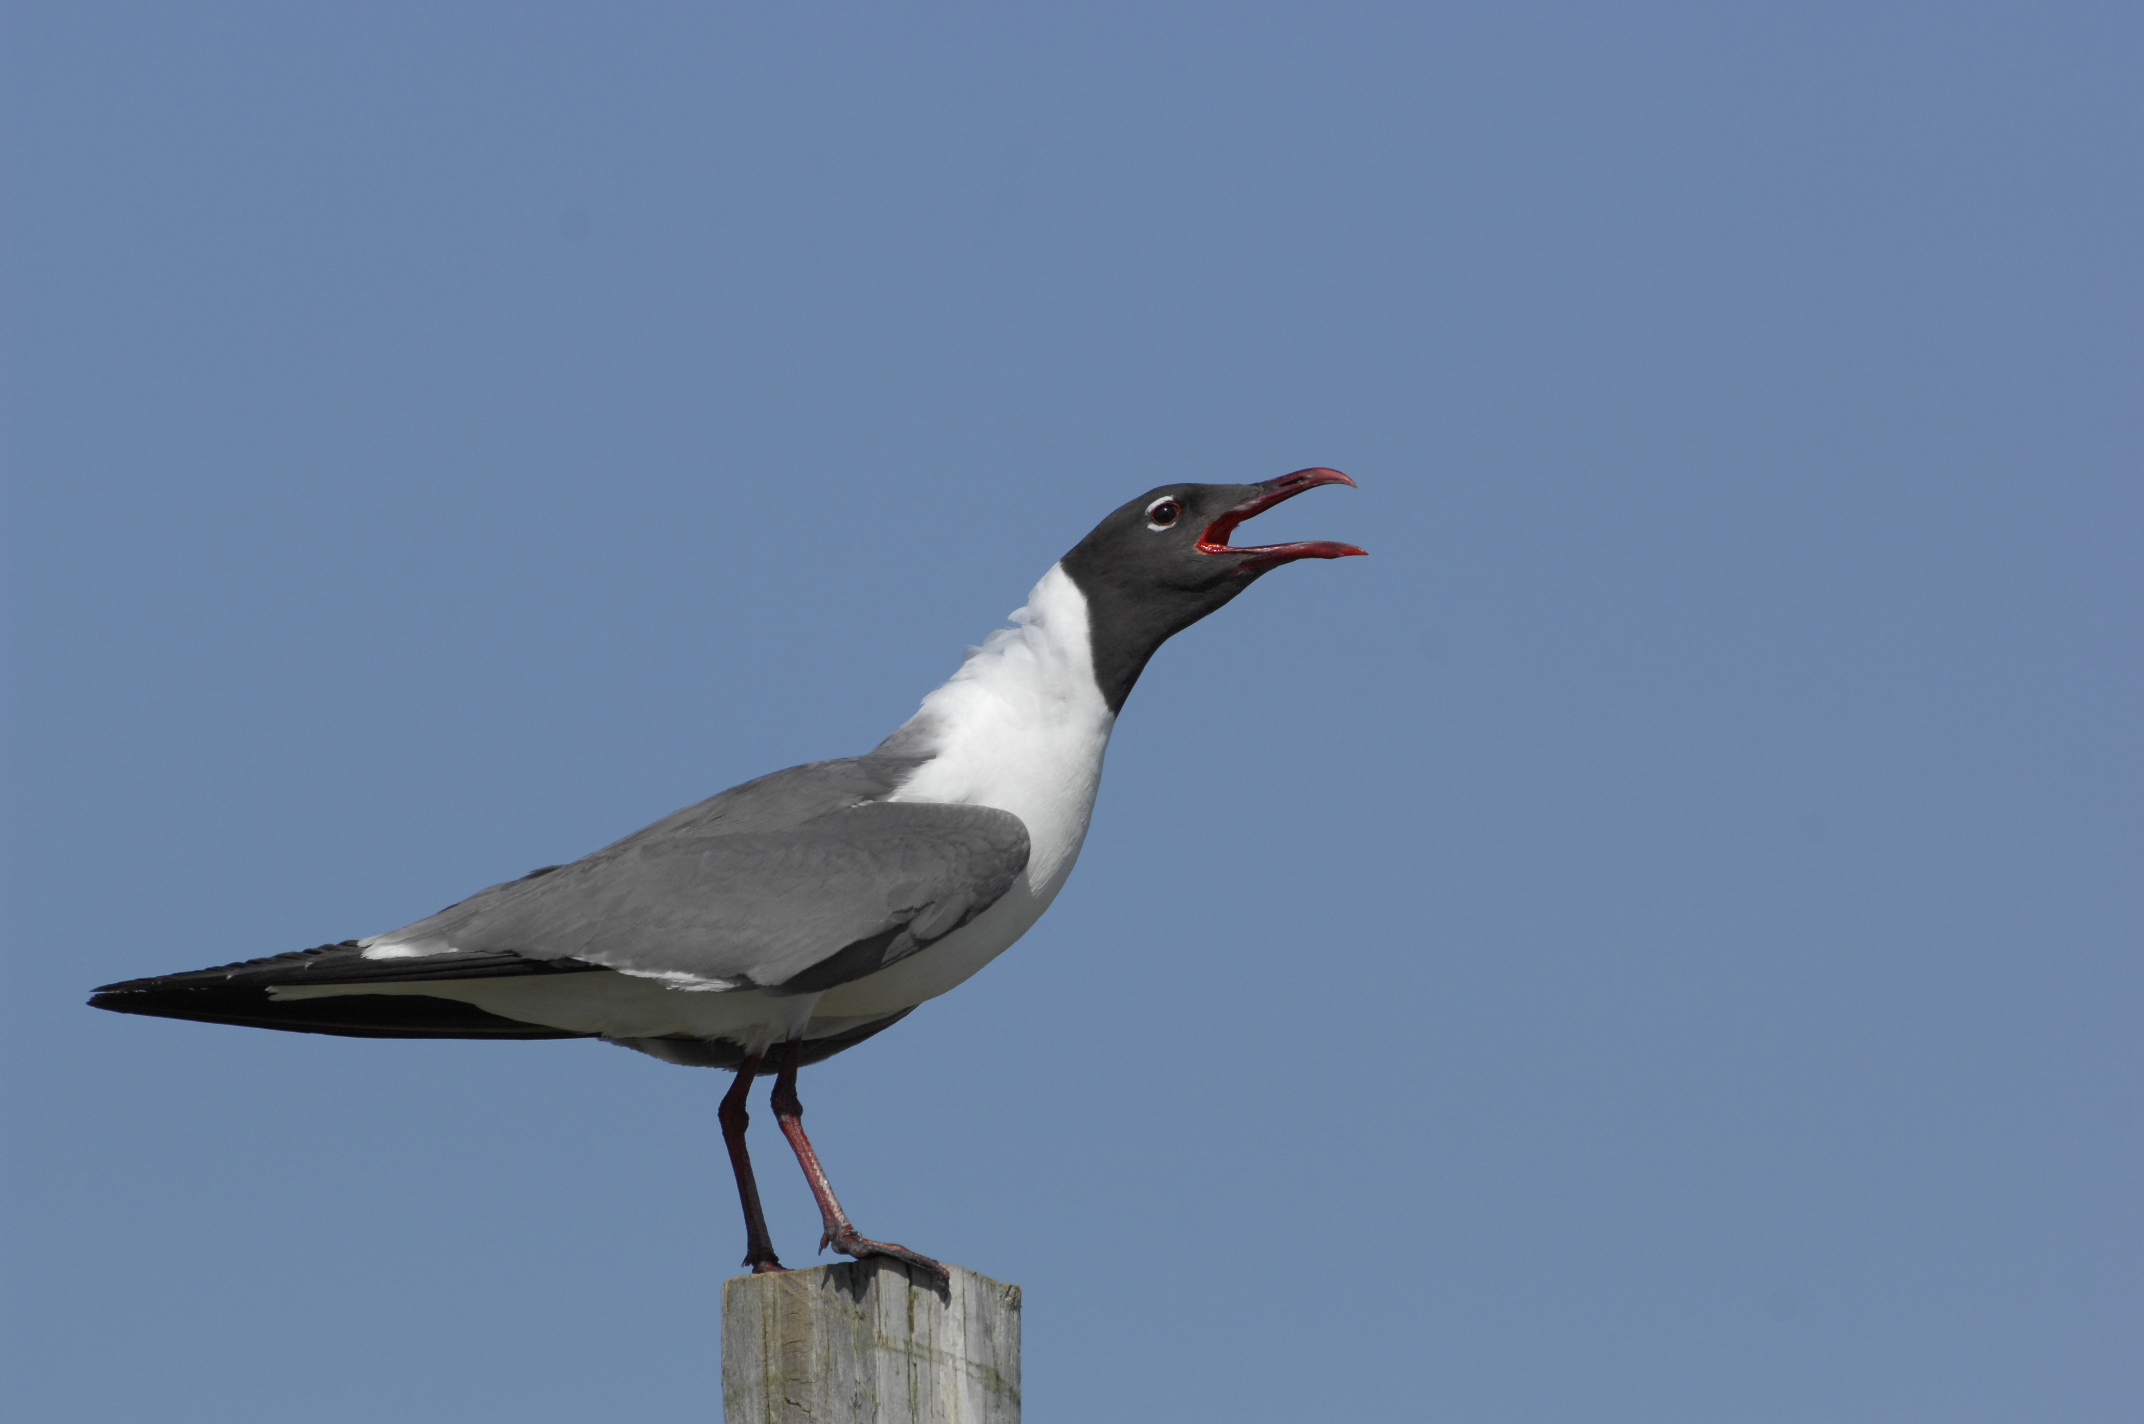 _JFF3938 Laughing Gull Aggression